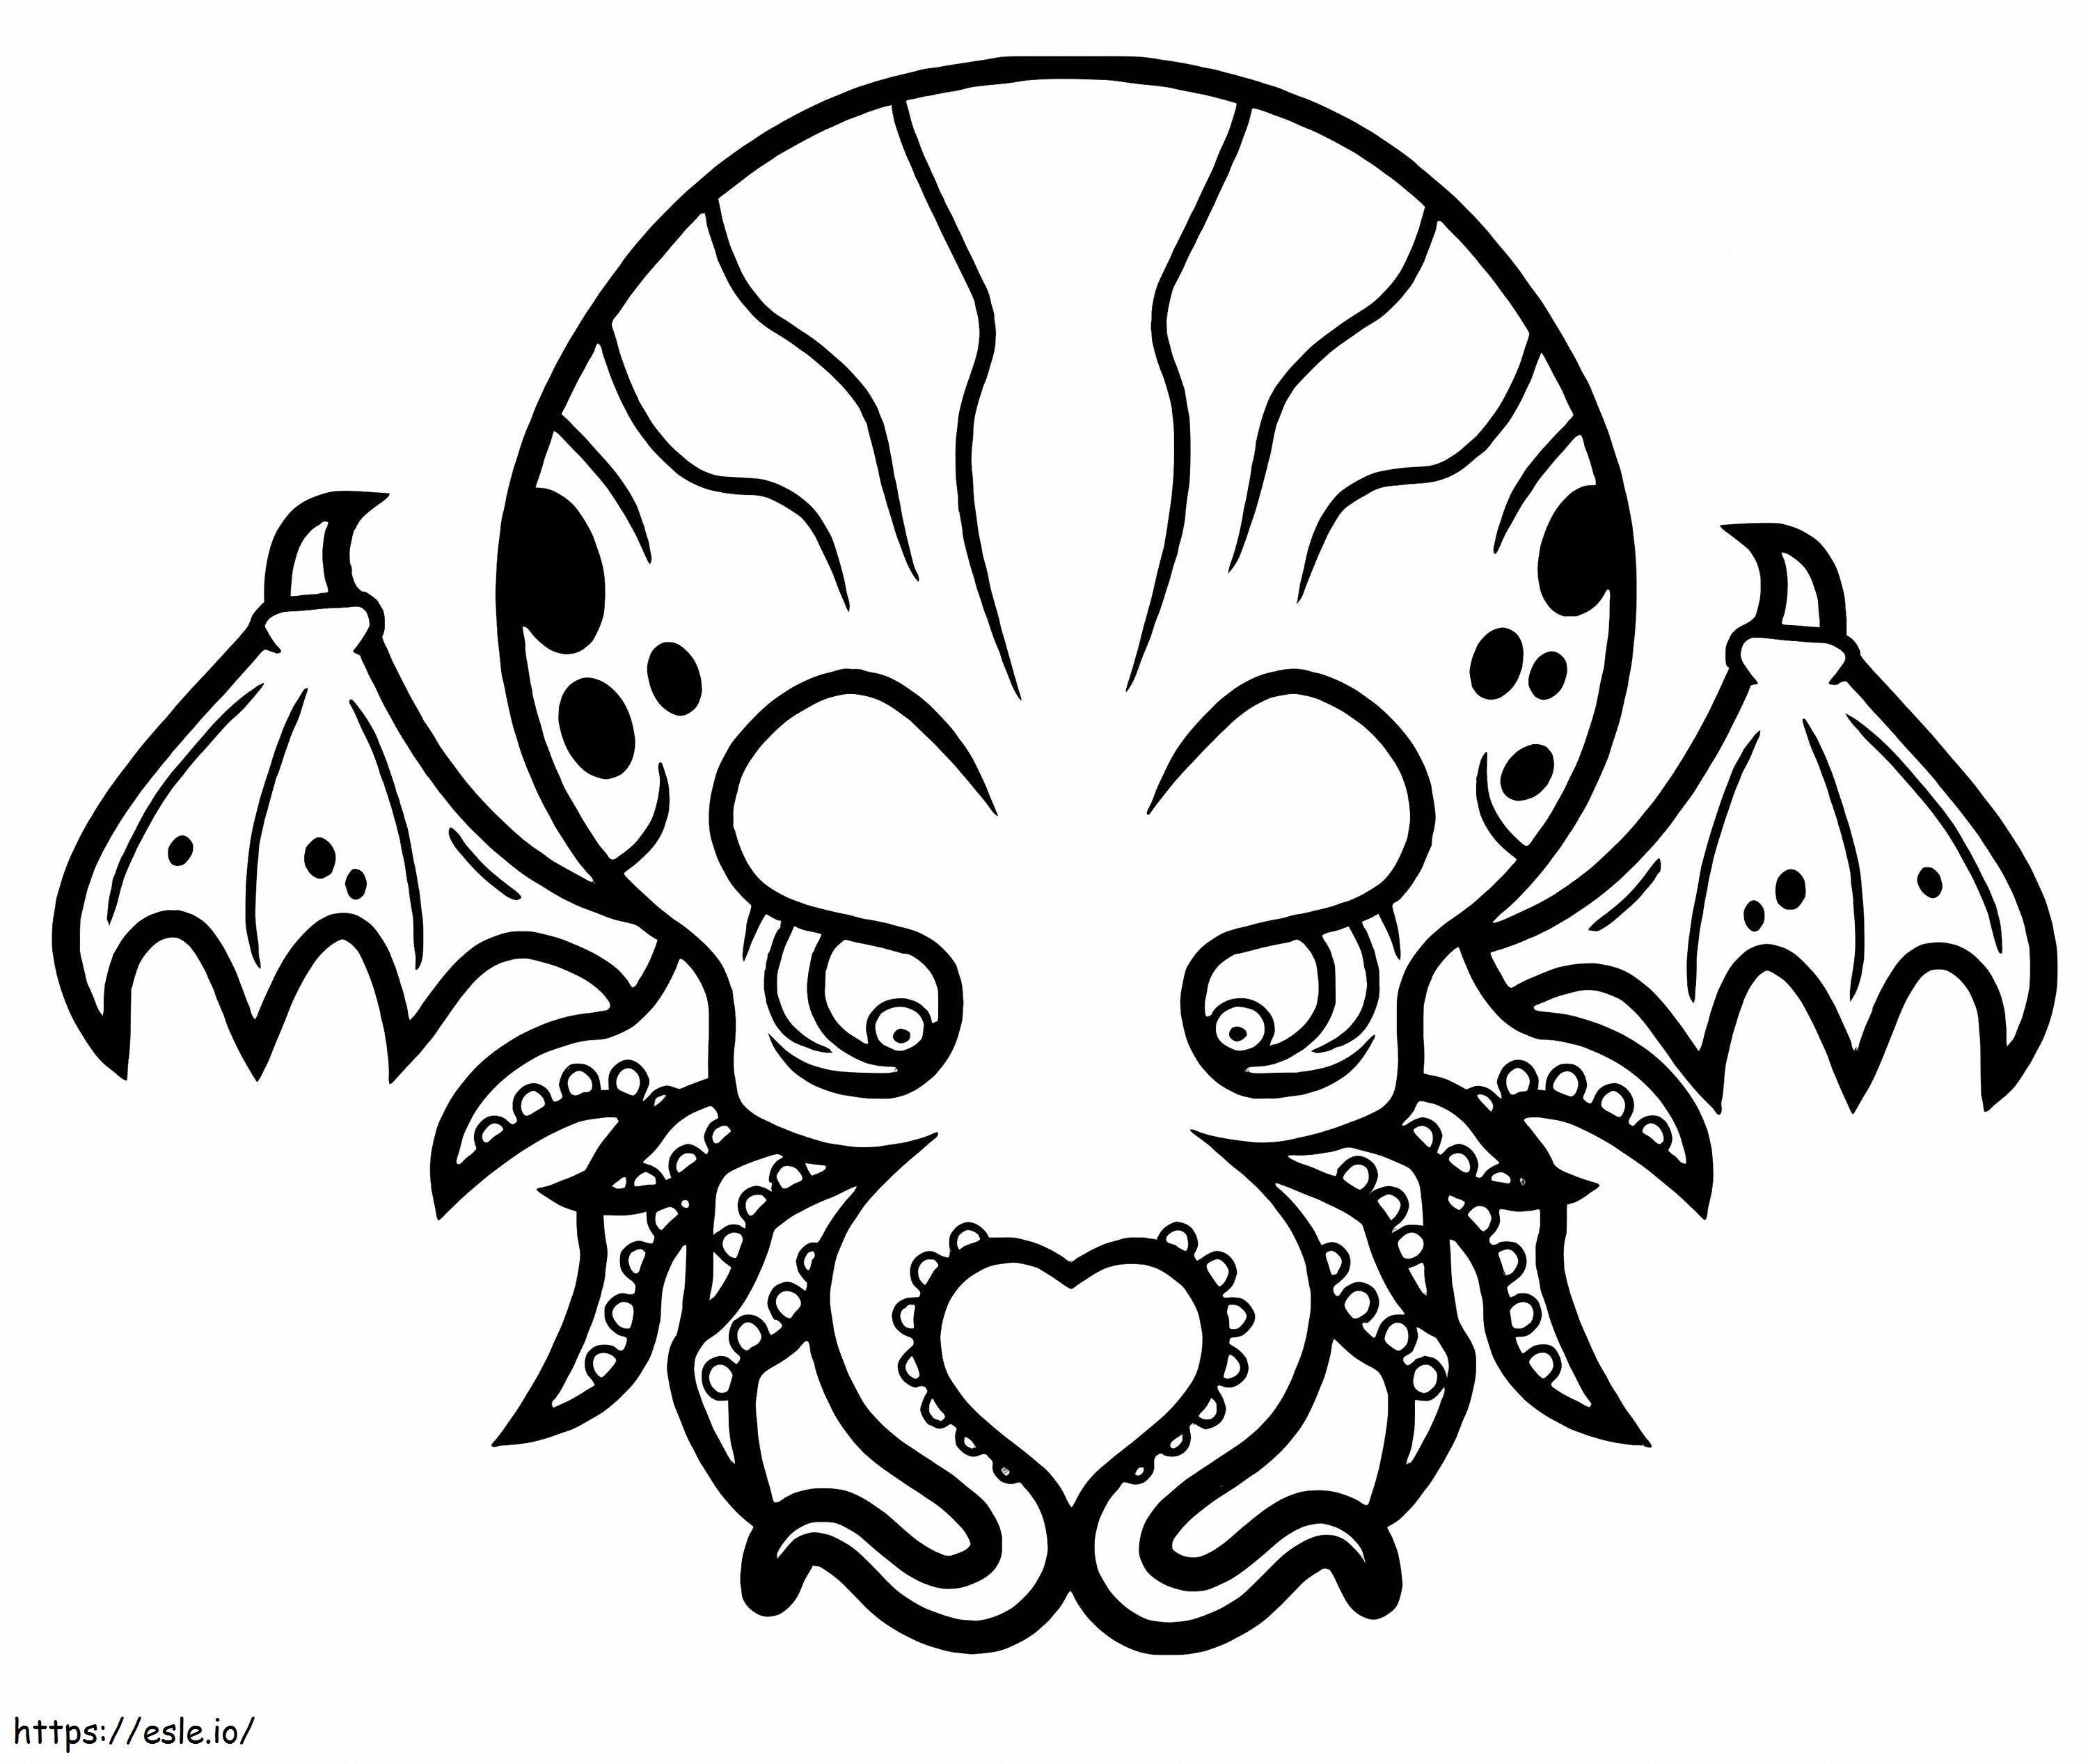 Free Cthulhu coloring page